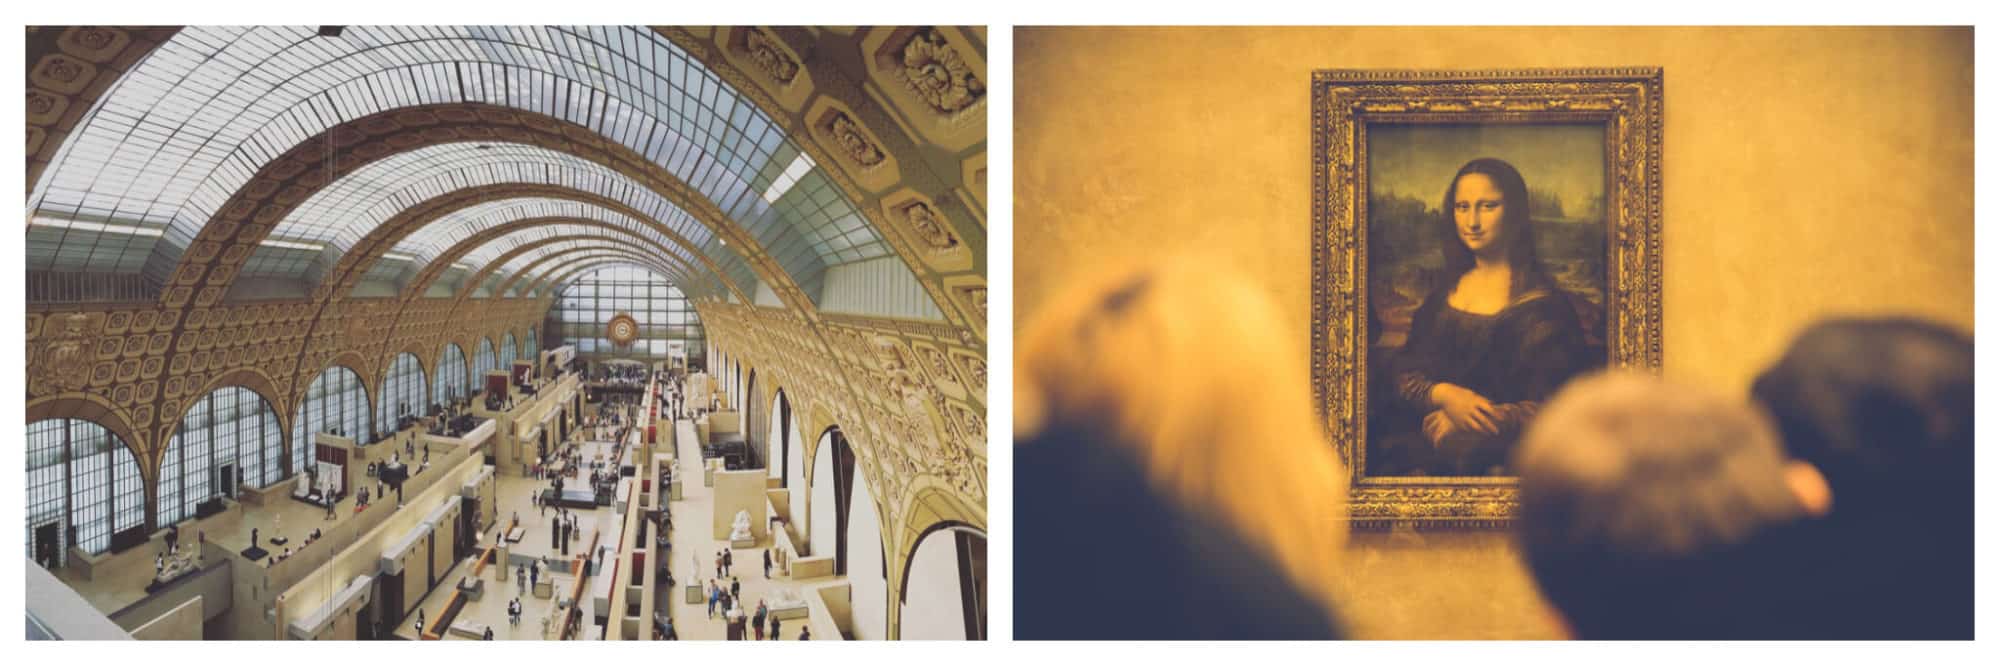 Left: the interior of D'Orsay Museum. It's a long room with an arched largely glass roof. The walls are engraved with a repetitive flower motif. The photo is taken from up high, looking down. There are sculptures along the first floor and the mezzanine above it, and there are lots of people. Right: Leonardo de Vinci's Mona Lisa painting hanging in the Louvre Museum. There are some people in front, looking at the painting. Their heads are out of focus.